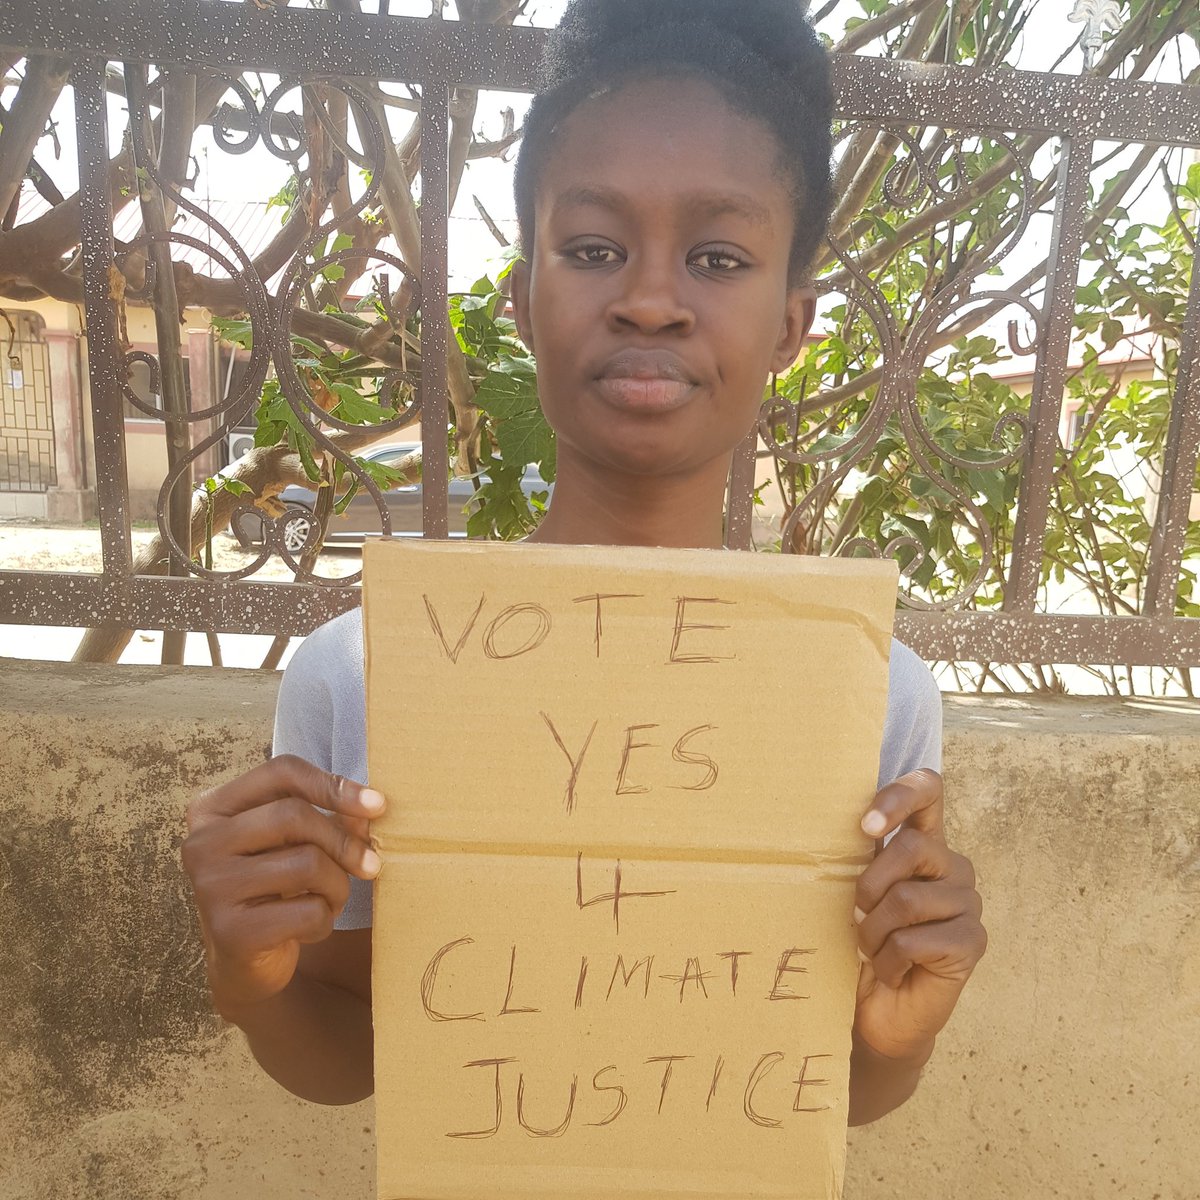 World leaders, give humanity a second chance at survival by voting Yes for climate justice at UNGA #ICJAO4Climate today.

#ICJAO4Climate #VoteYesForClimateJustice #UNGA
#ClimateJustice